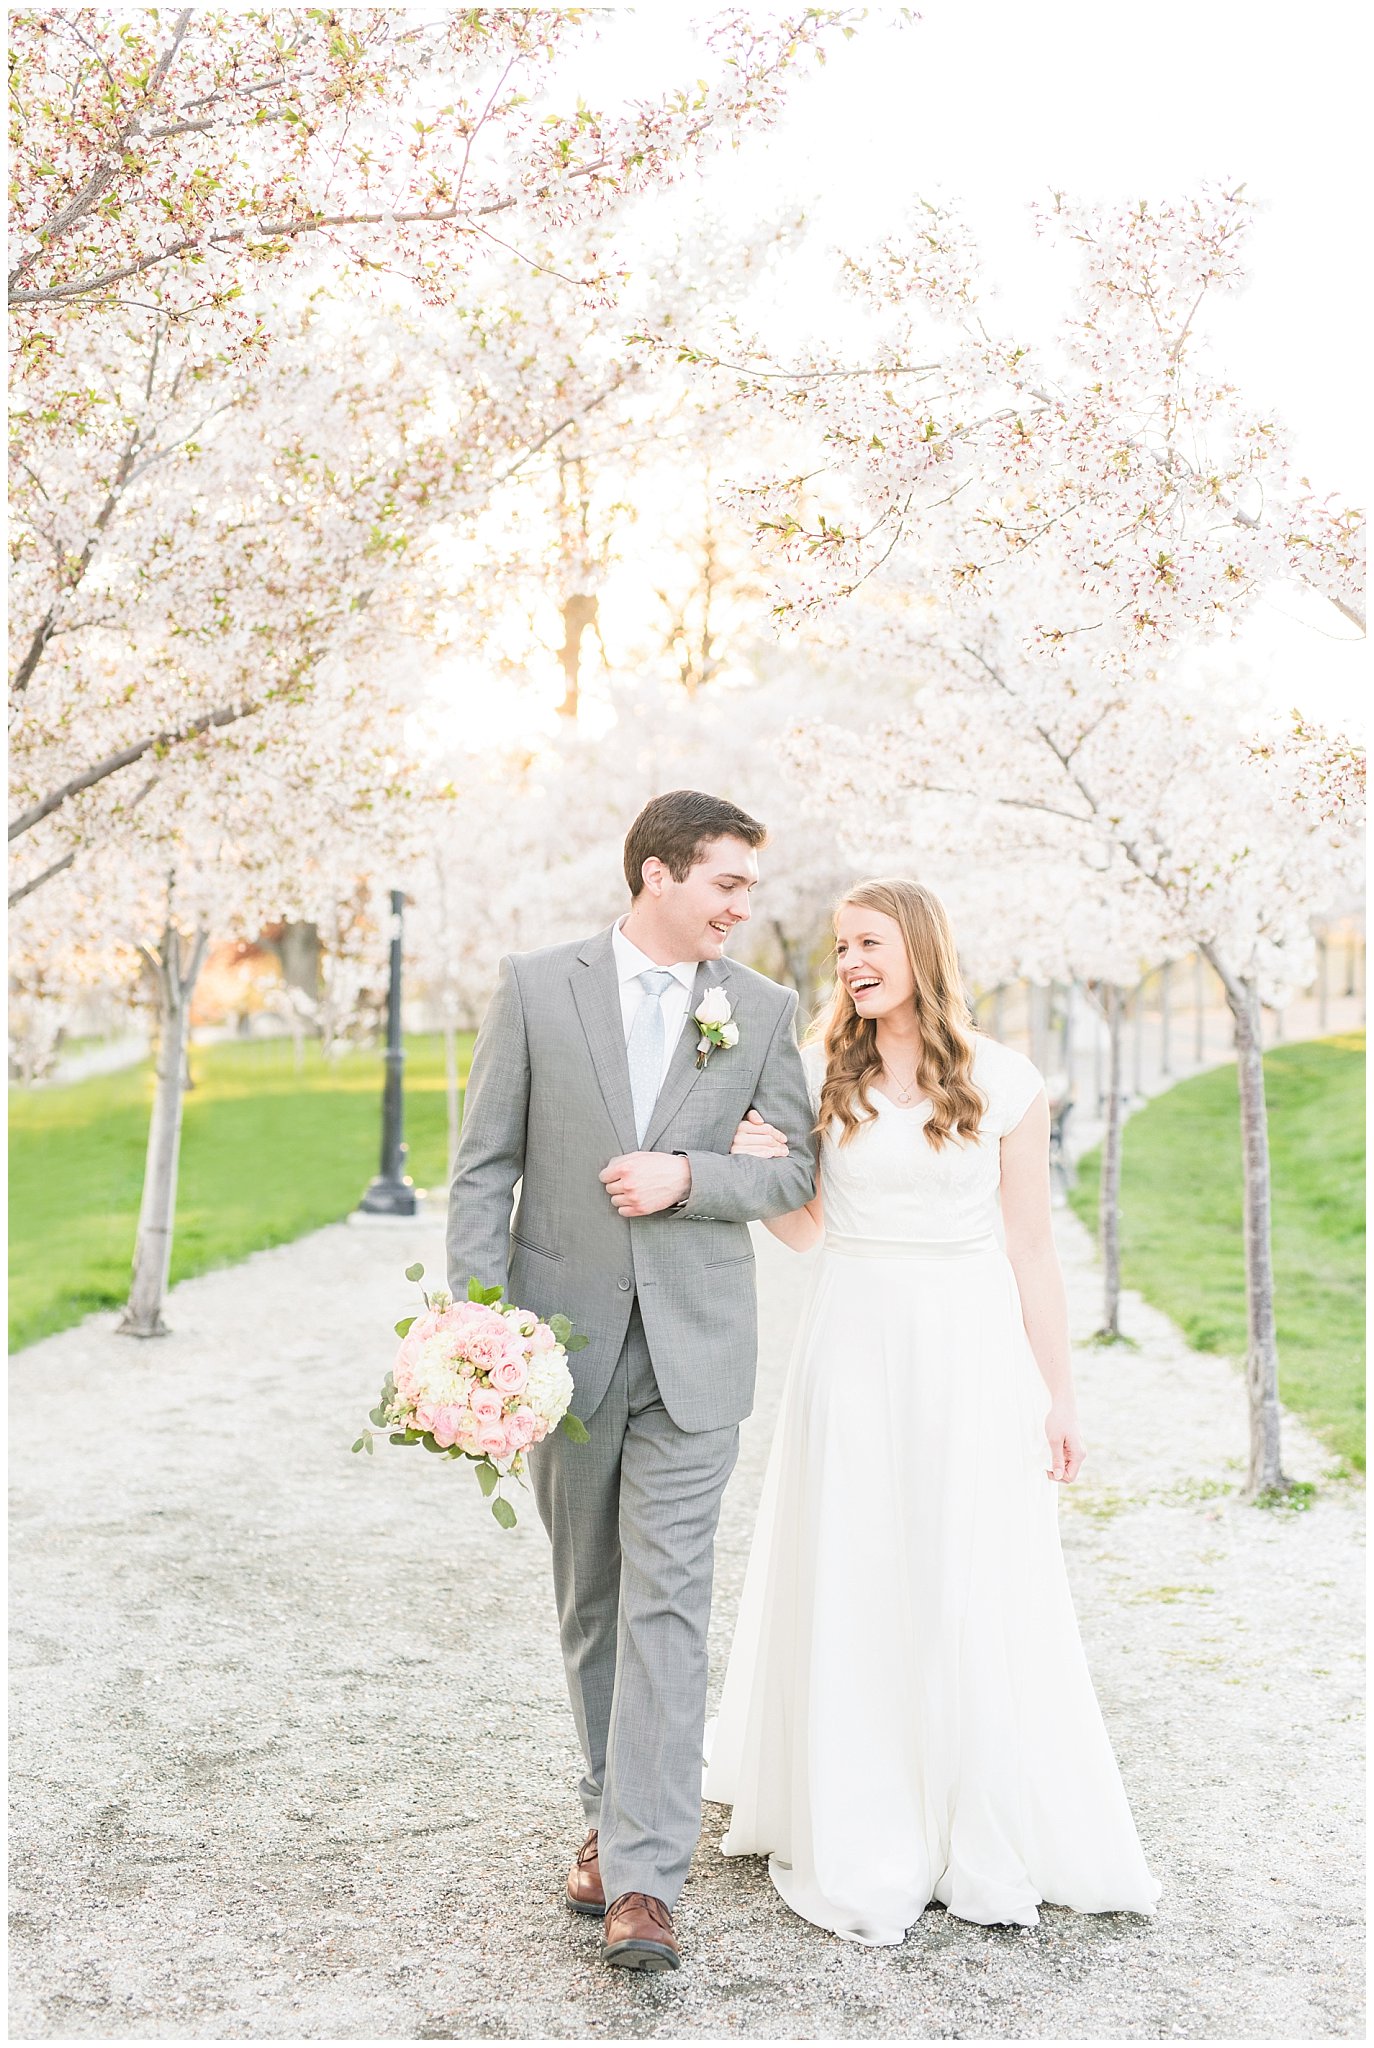 Bride and groom walking through the blossoms at the Utah State Capitol | Top Utah Wedding and Couples Photos 2019 | Jessie and Dallin Photography